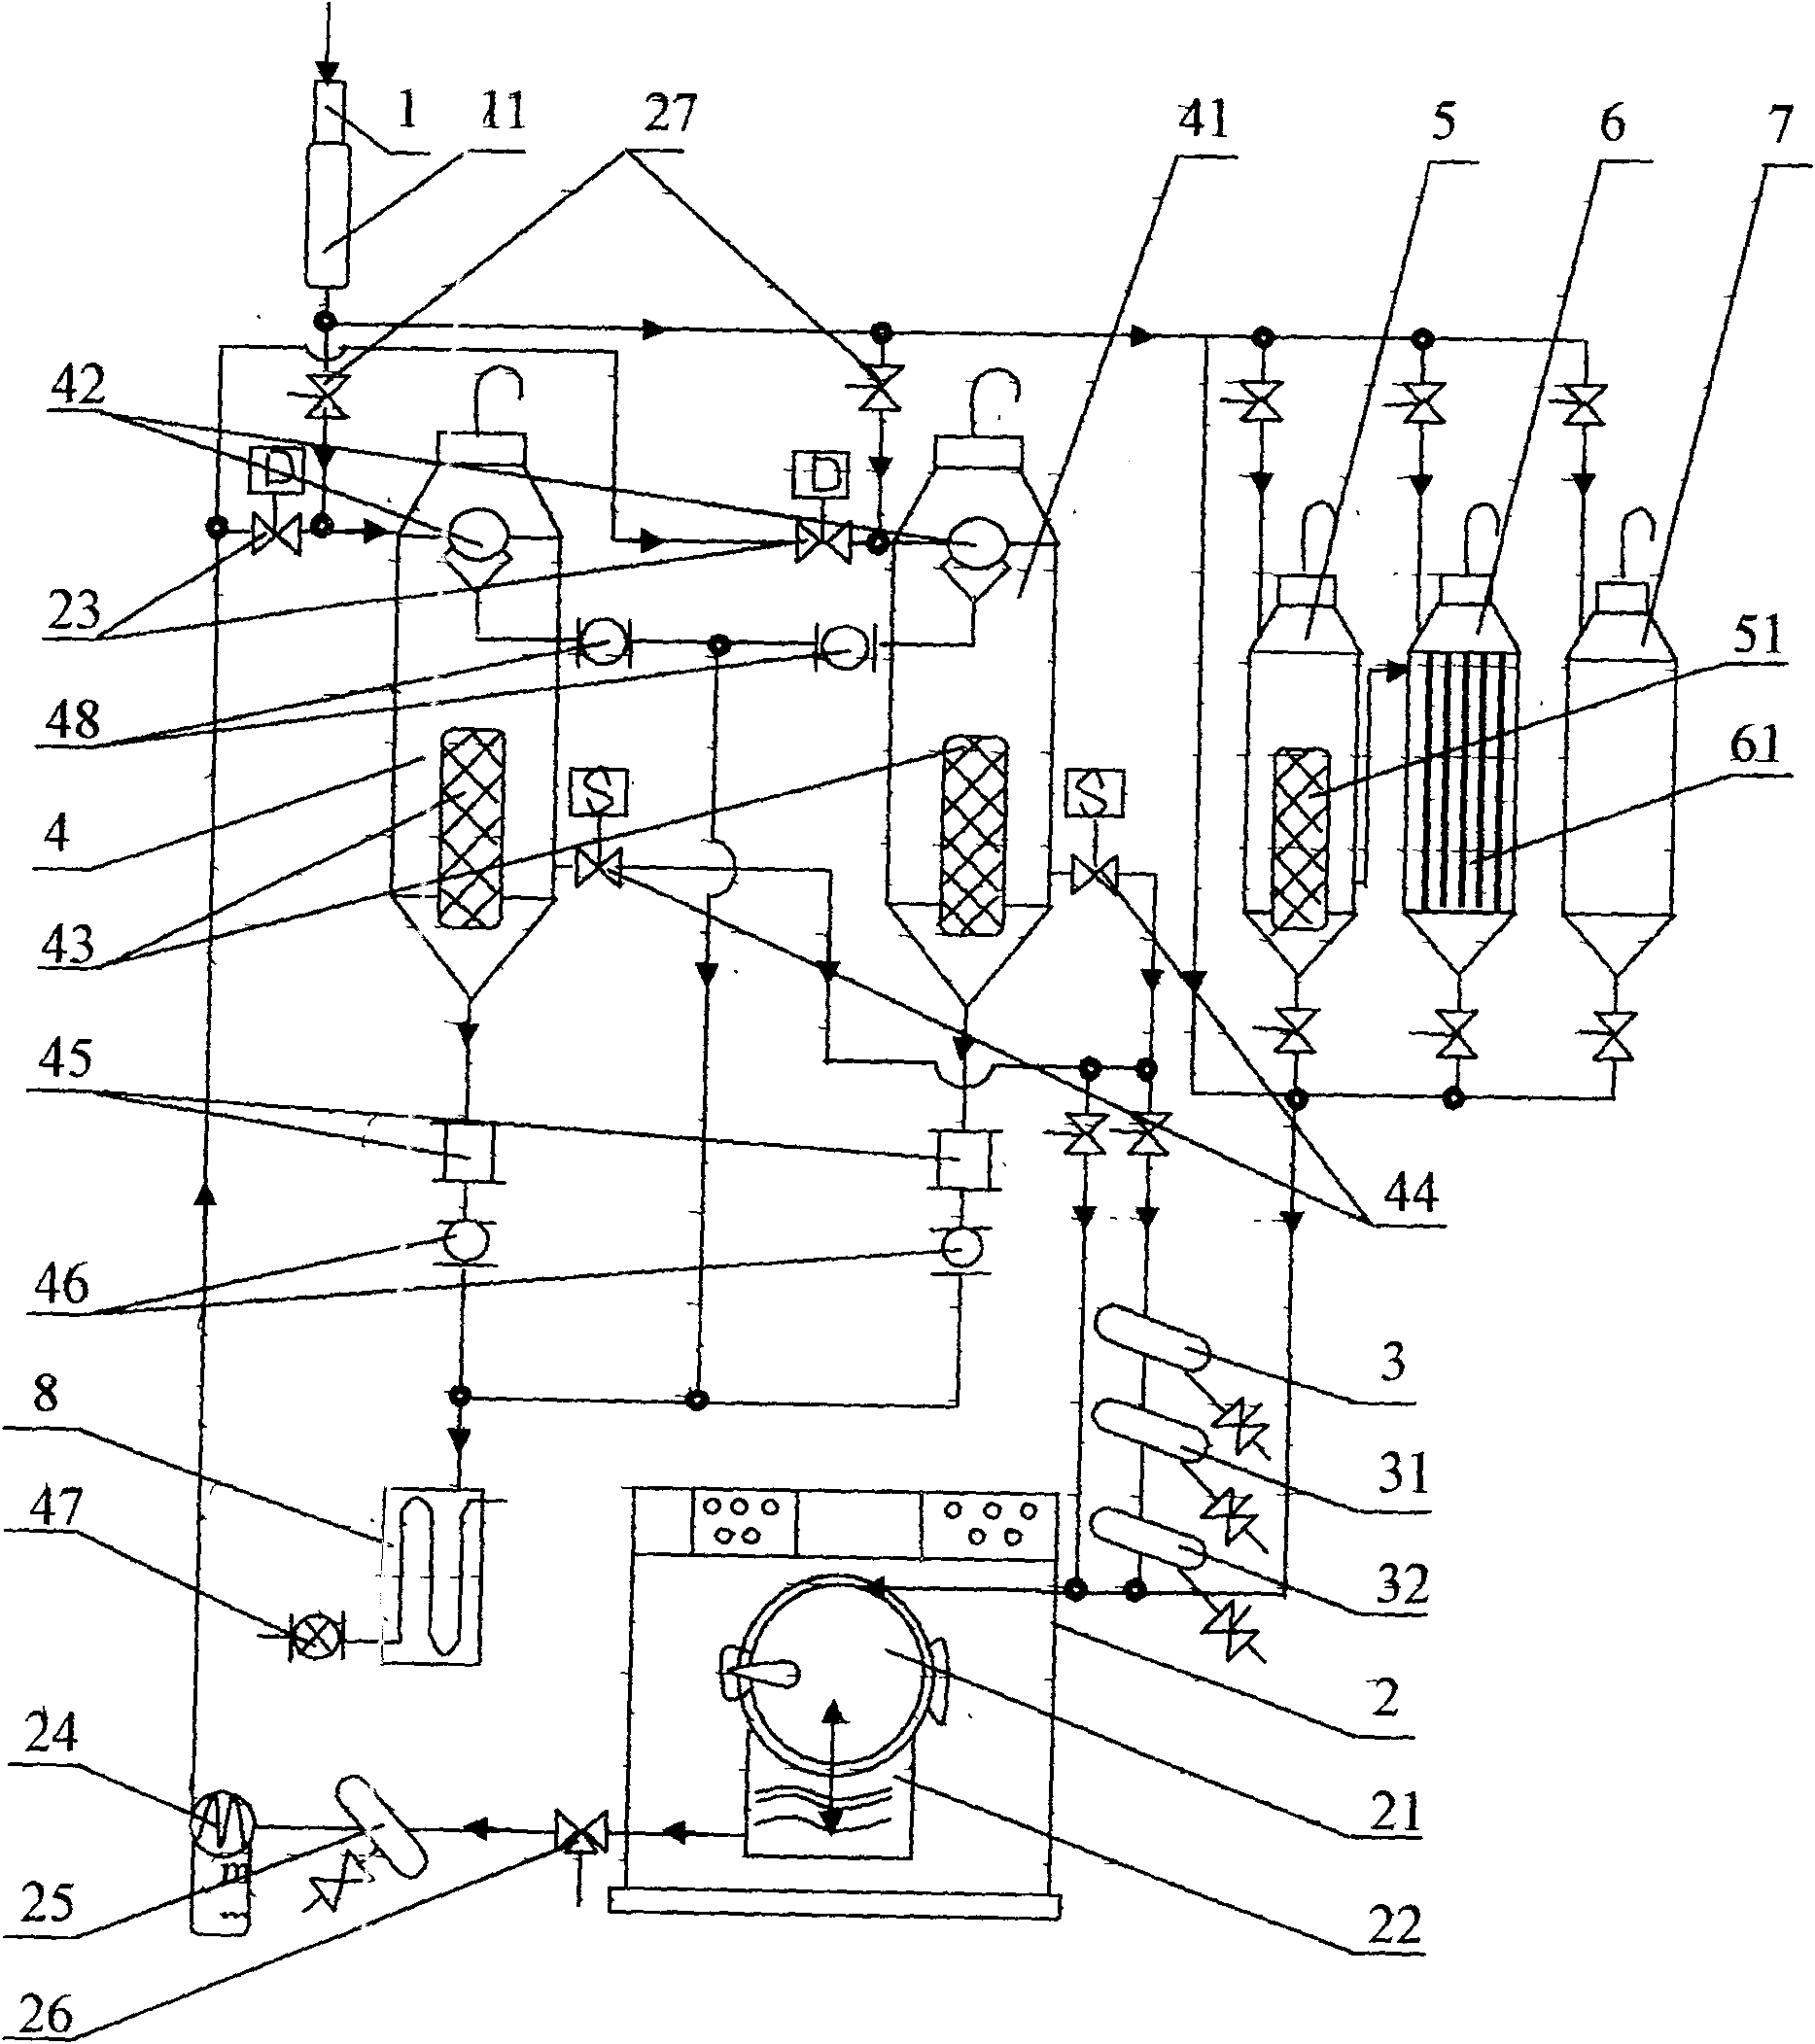 Scrubbing apparatus without washing powder and capable of circulation using water